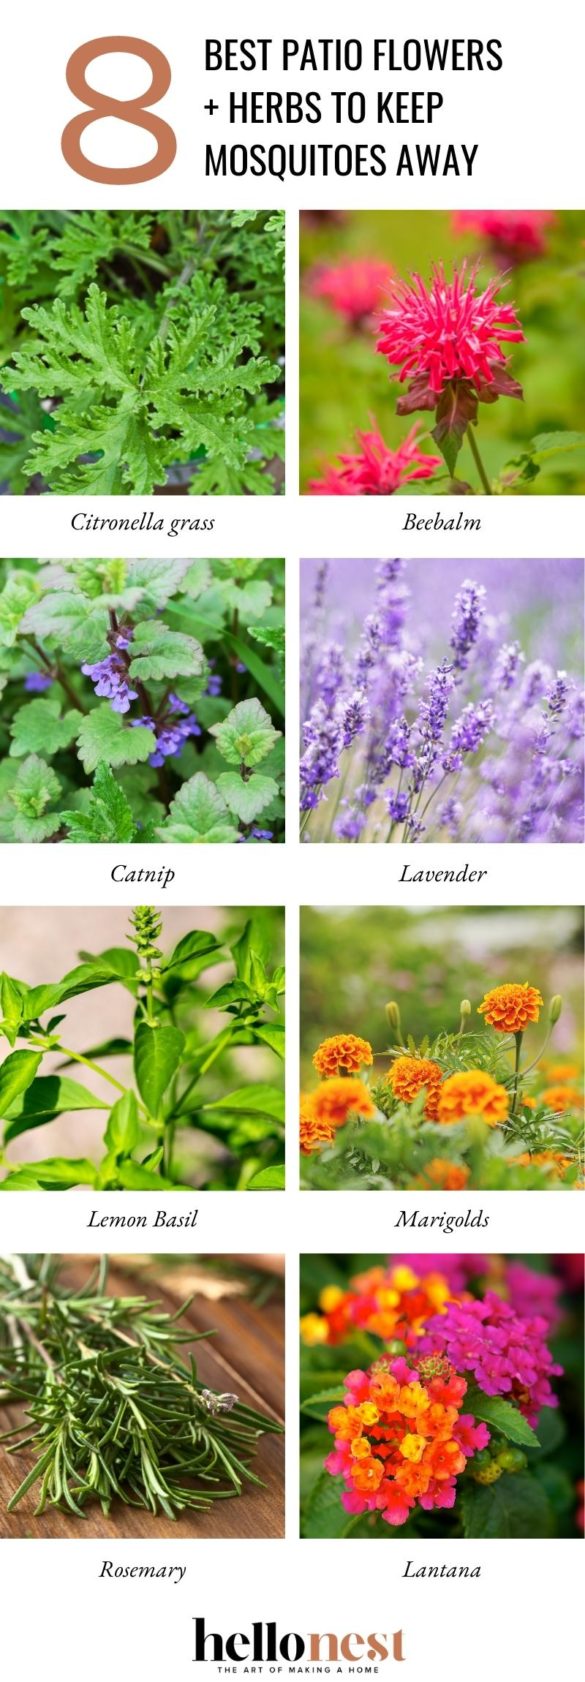 8 Best Patio Flowers and Herbs to Keep Mosquitoes Away